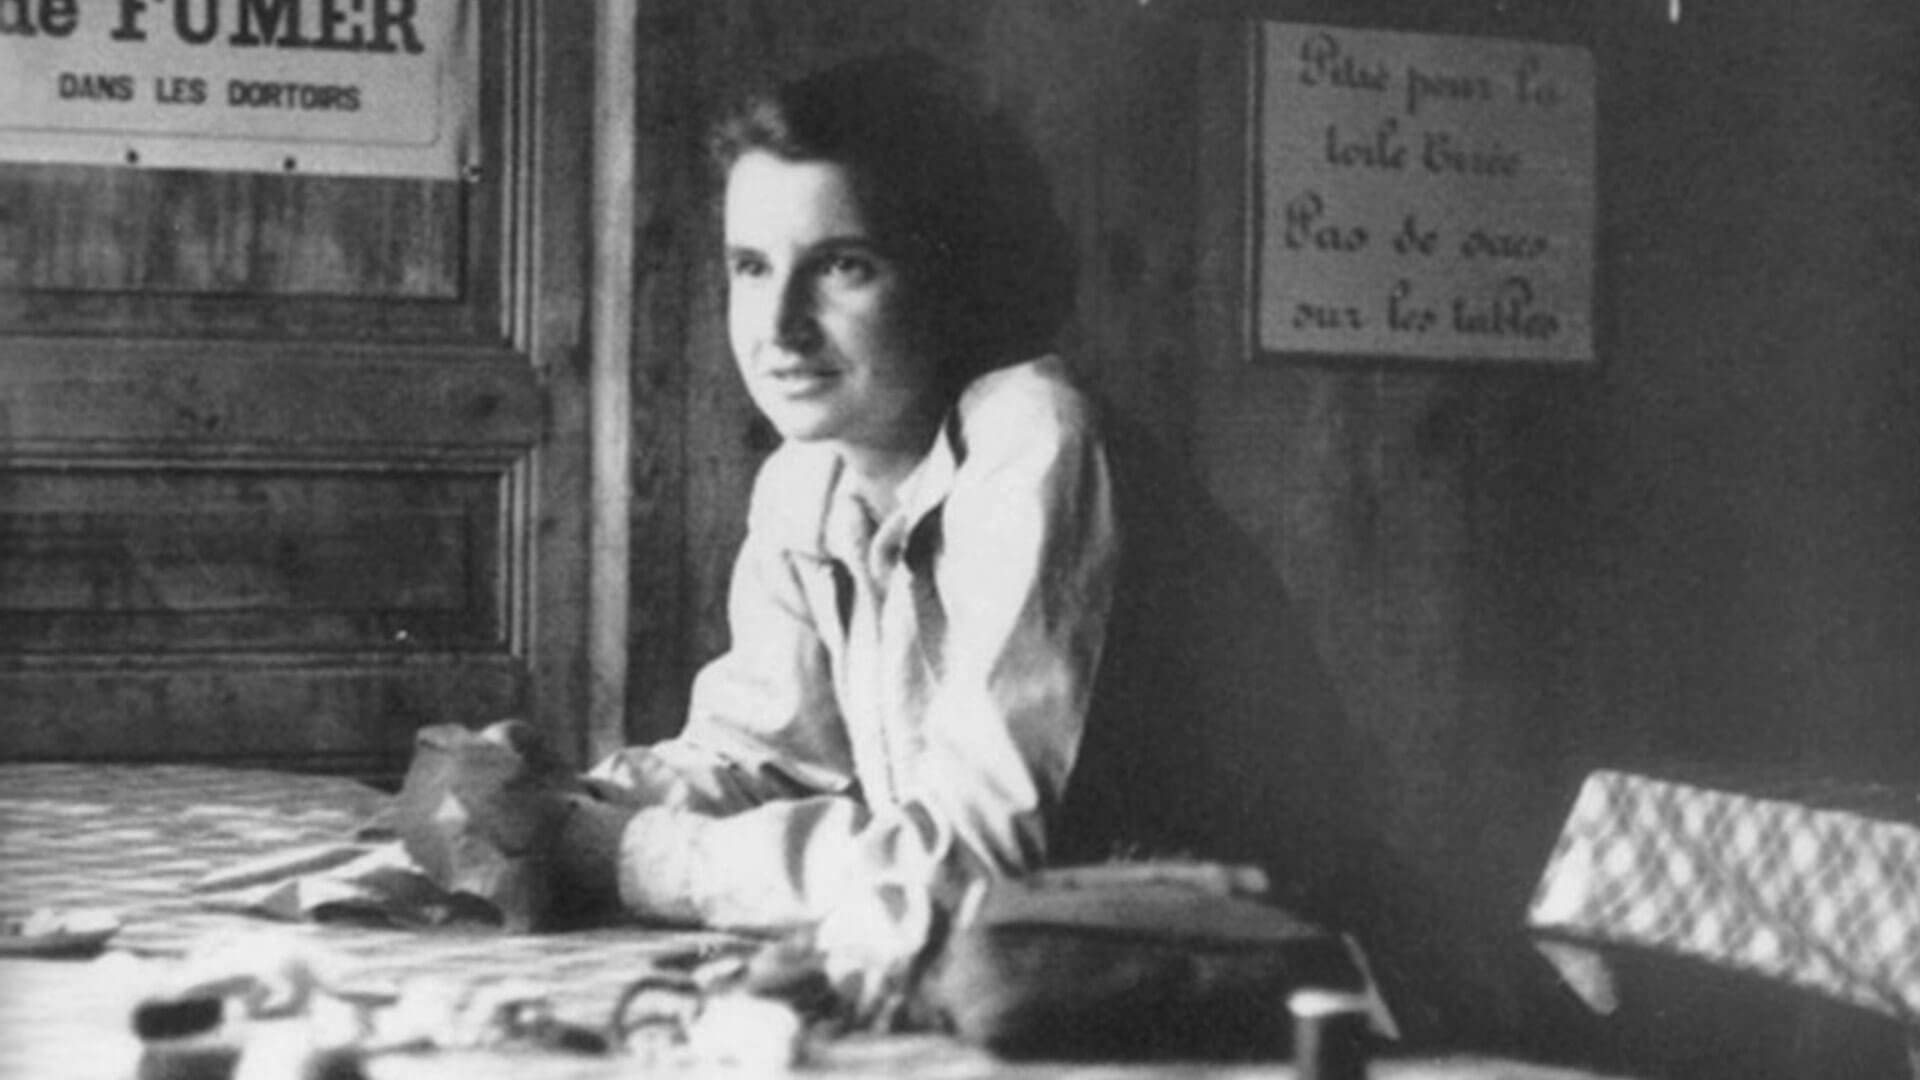 Rosalind Franklin's X-ray photographs paved the way for Watson and Crick's Nobel Prize.